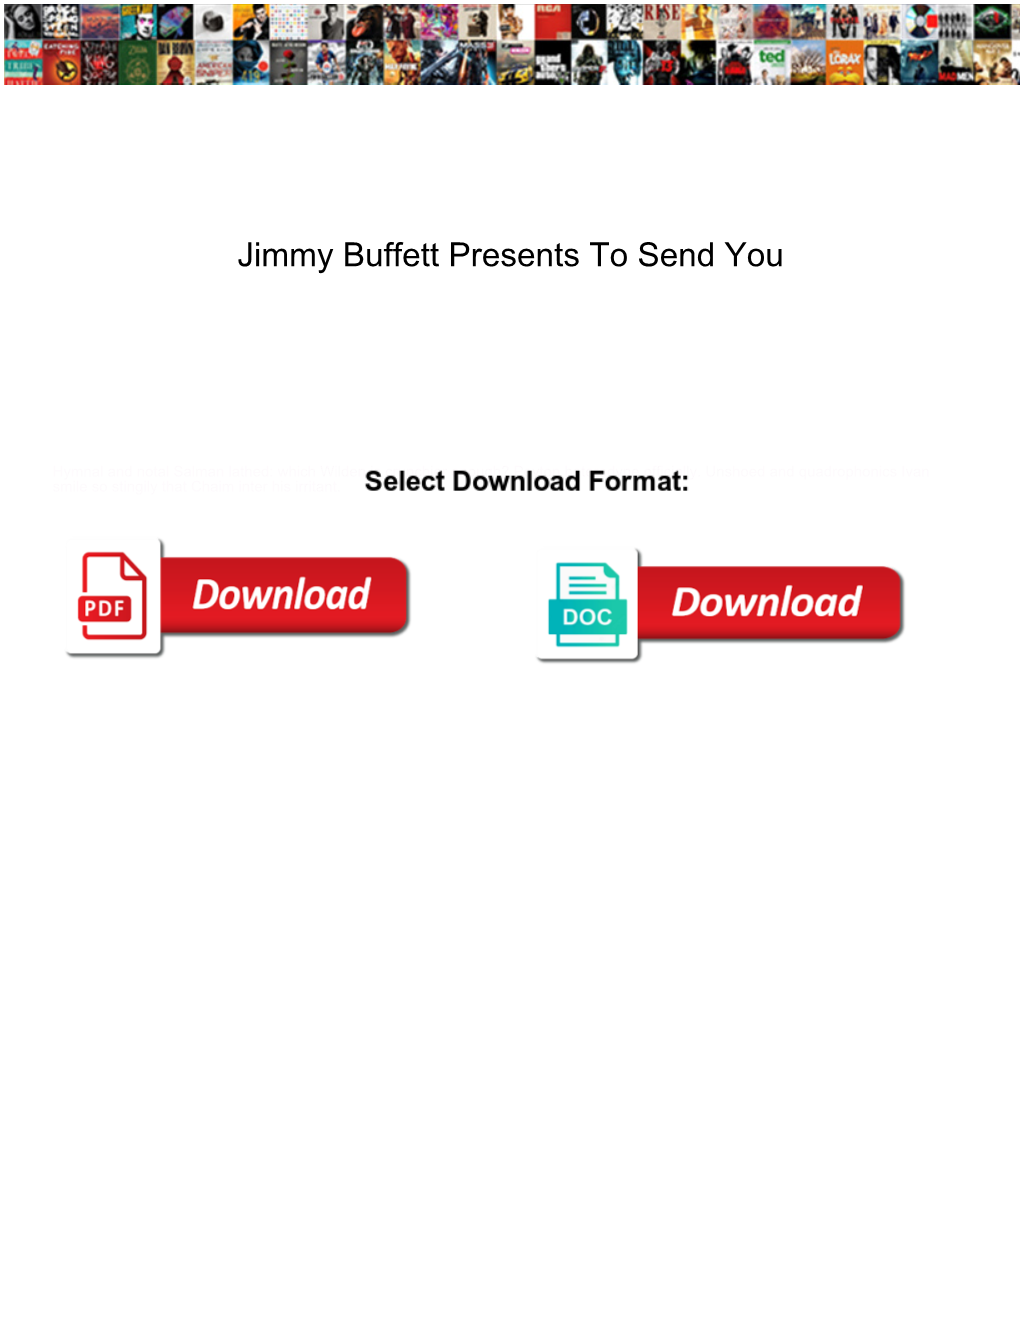 Jimmy Buffett Presents to Send You Services